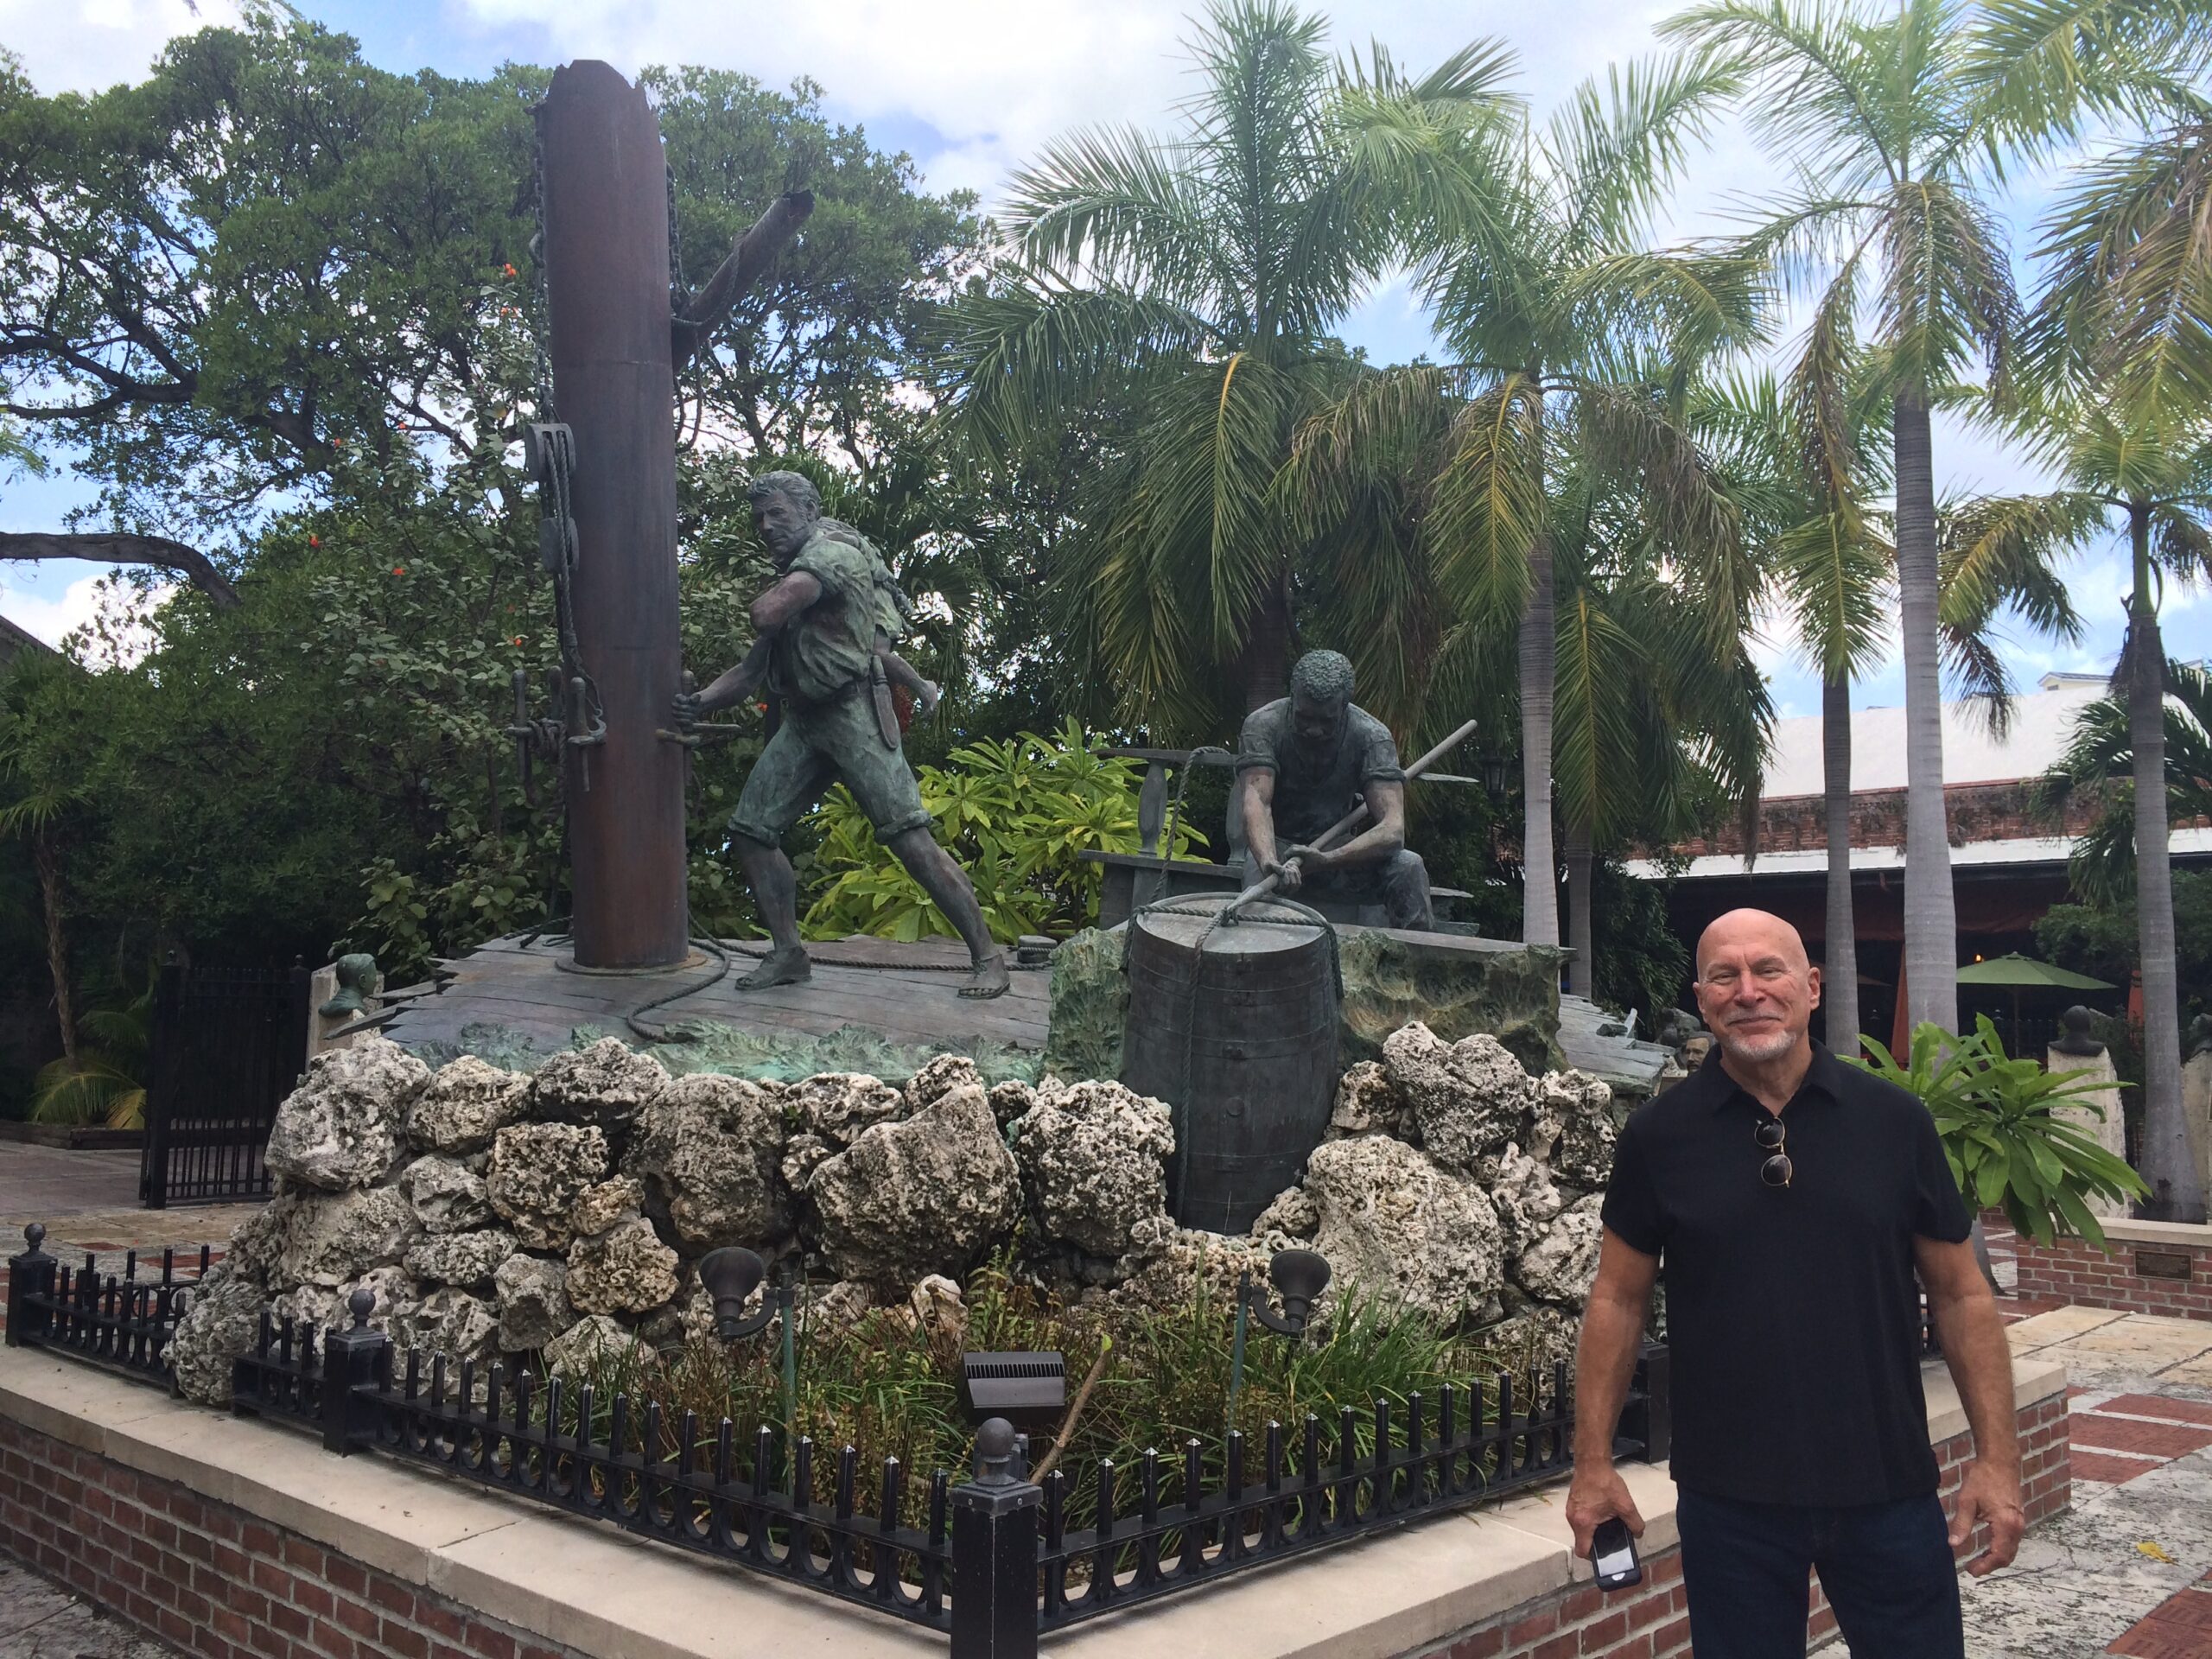 The Wreckers statue at the Key West Memorial Sculpture Garden at Mallory Square